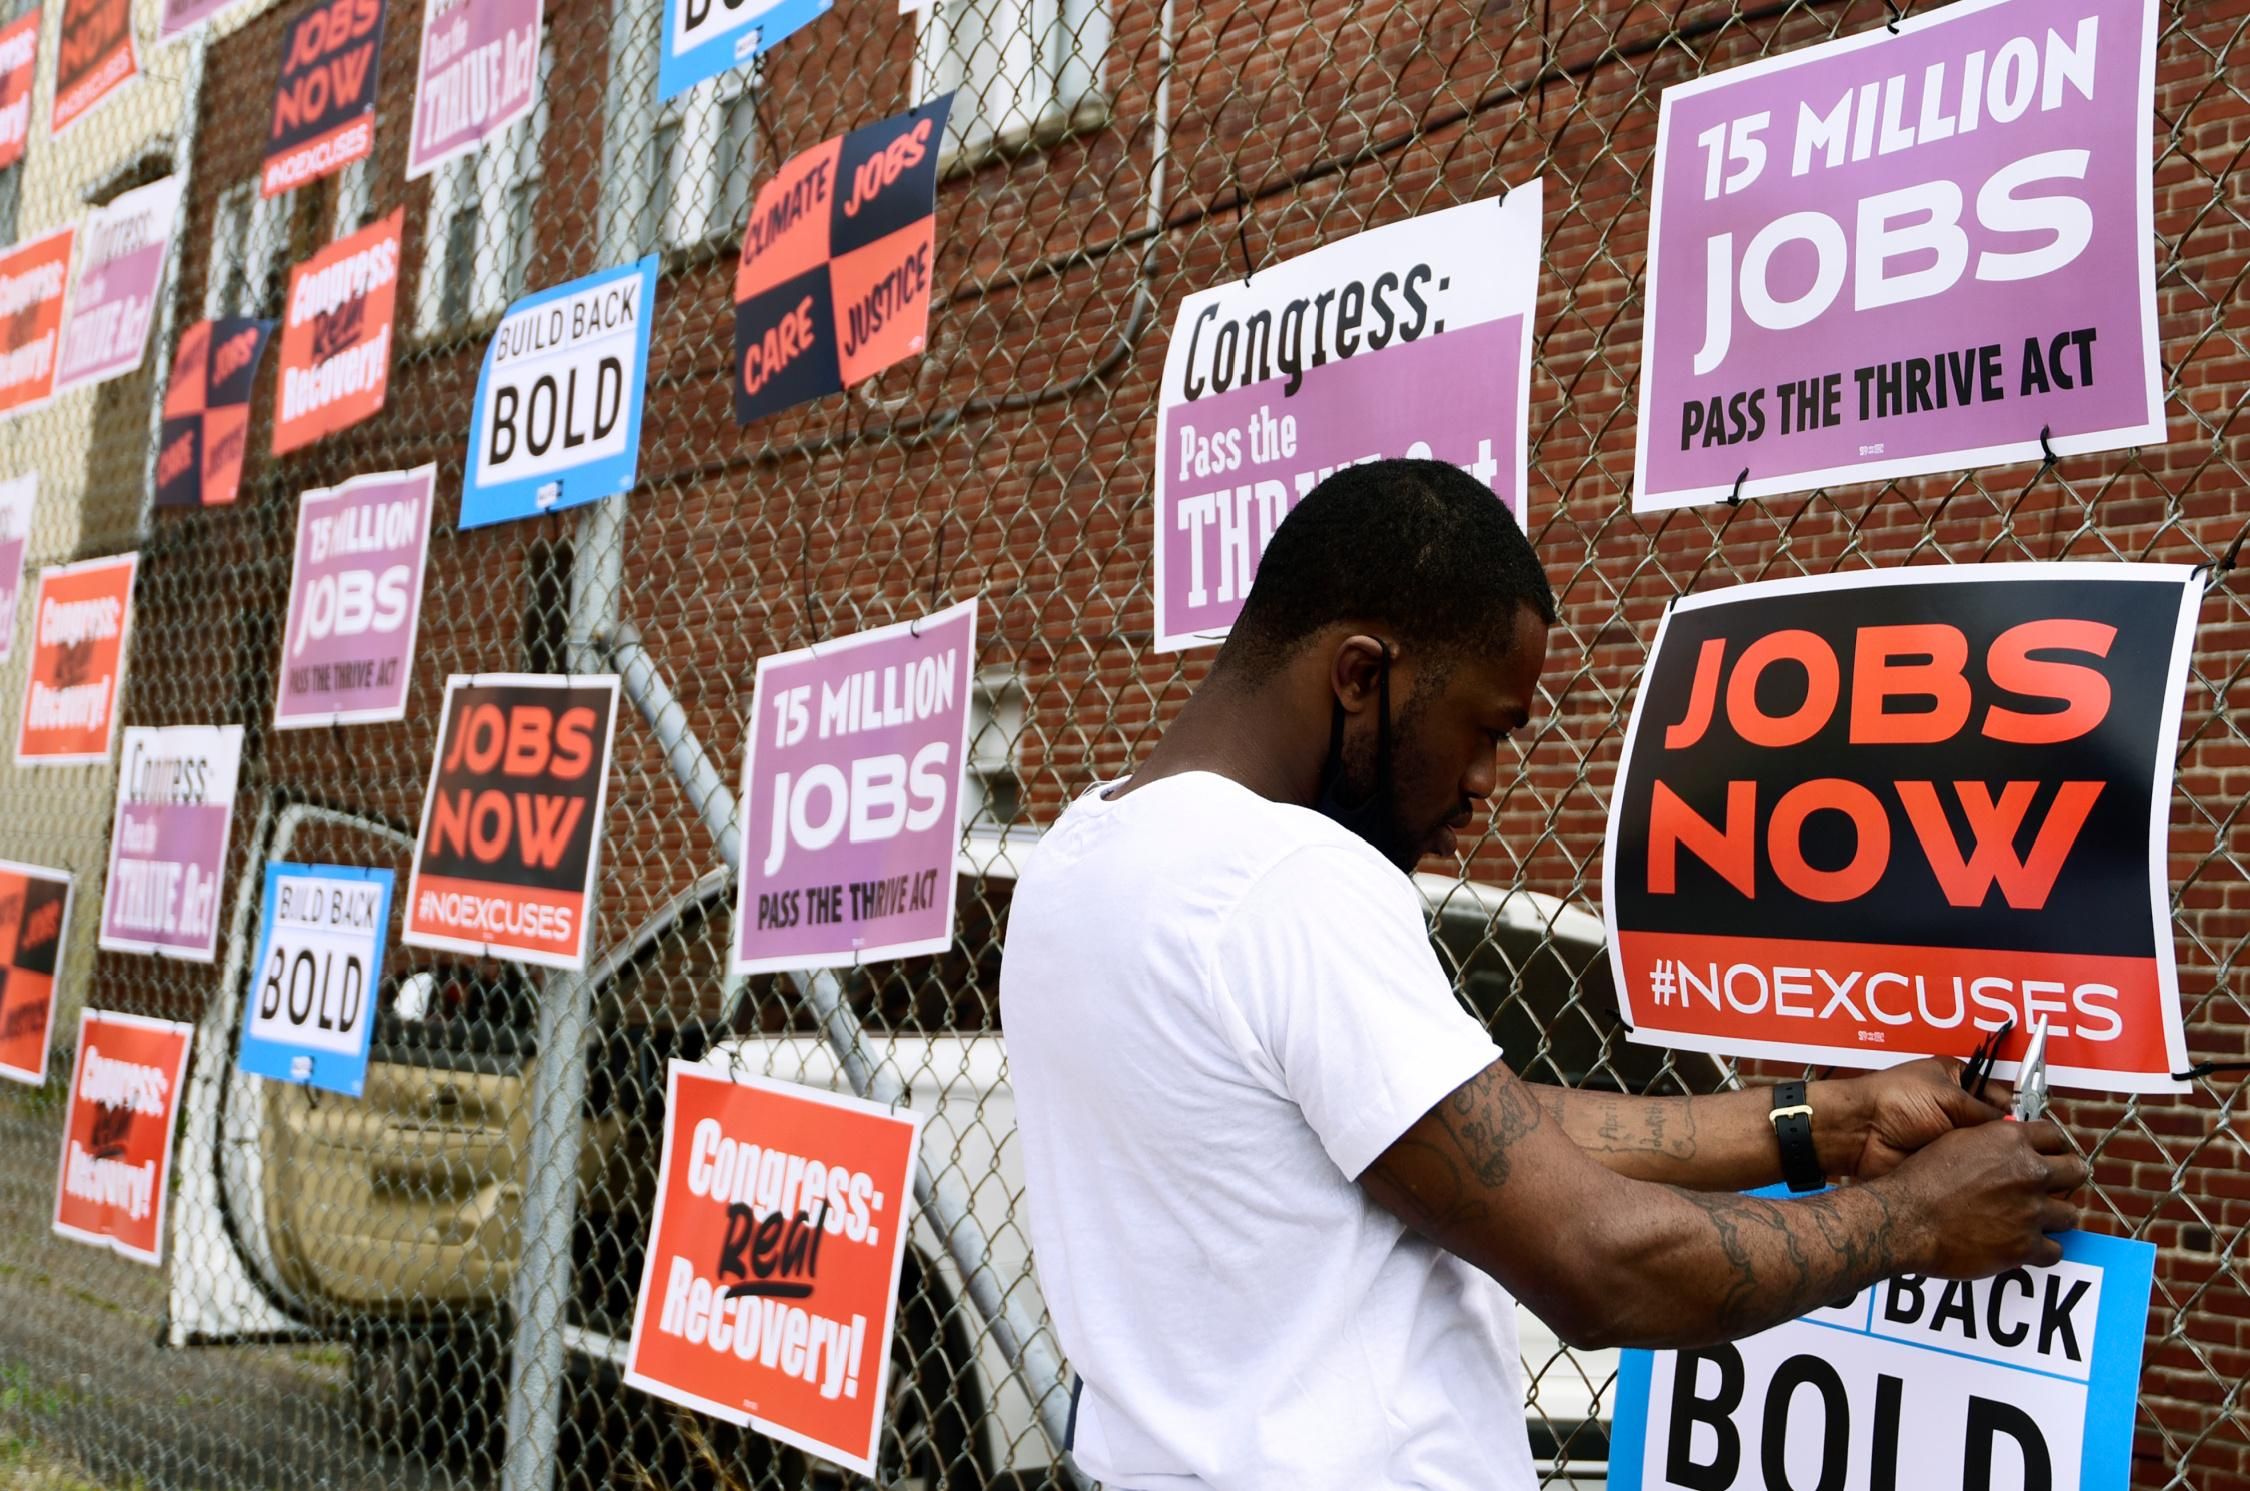 Derrick Davis, a member of West Virginia New Jobs Coalition, hangs up signage during a community gathering and job fair on April 8, 2021 in Charleston, West Virginia.